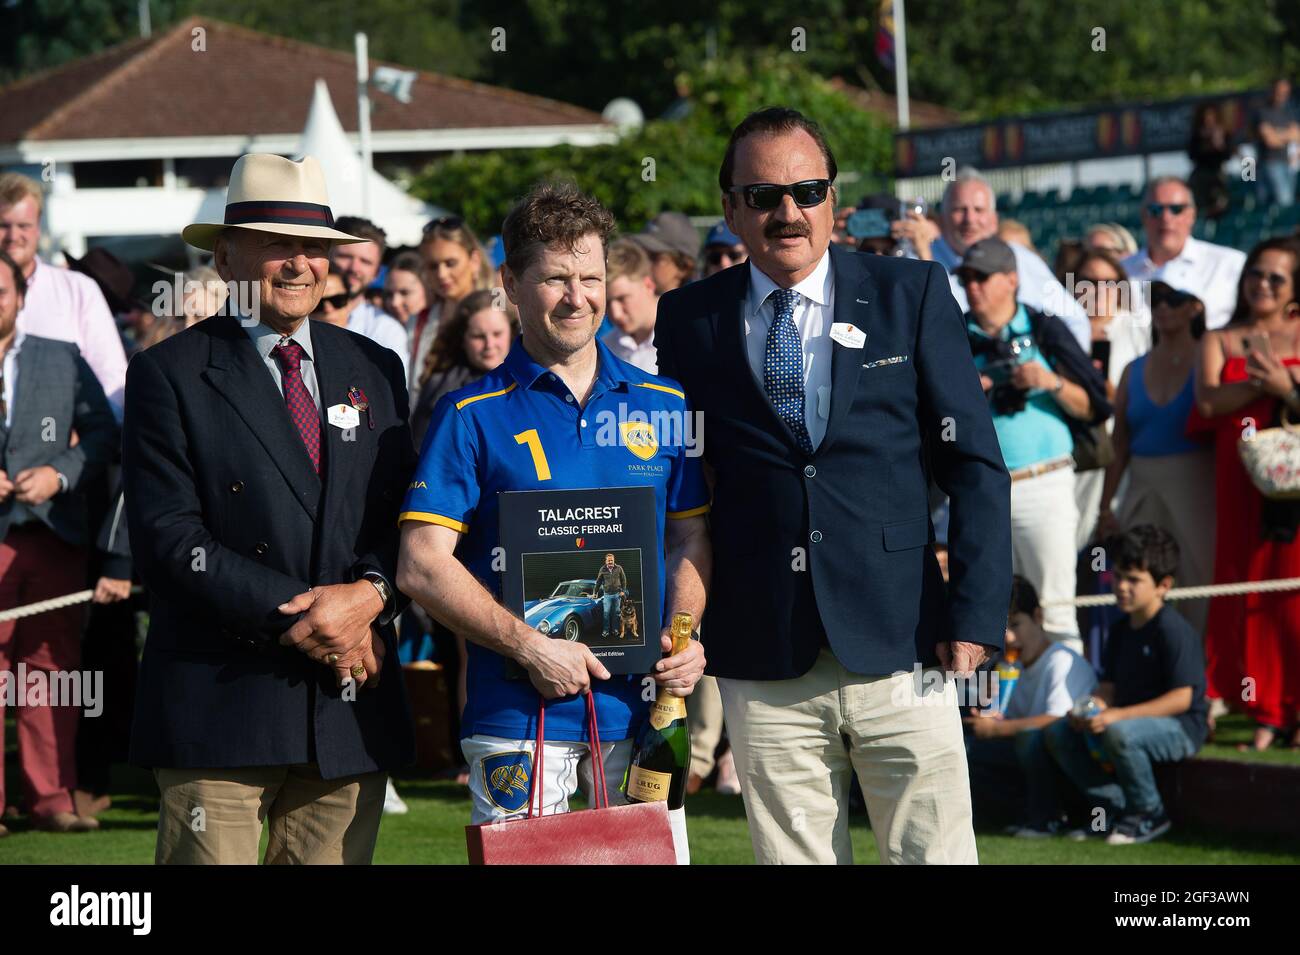 Egham, Surrey, UK. 22nd August, 2021. Polo player Andrey Borodin has a photo with Guards Polo Club Brian Stein (left) and John Collins CEO and Founder of Talacrest (right) after his team Park Place won the Talacrest Prince of Wales's Championship Cup Final at Guards Polo Club. Credit: Maureen McLean/Alamy Stock Photo